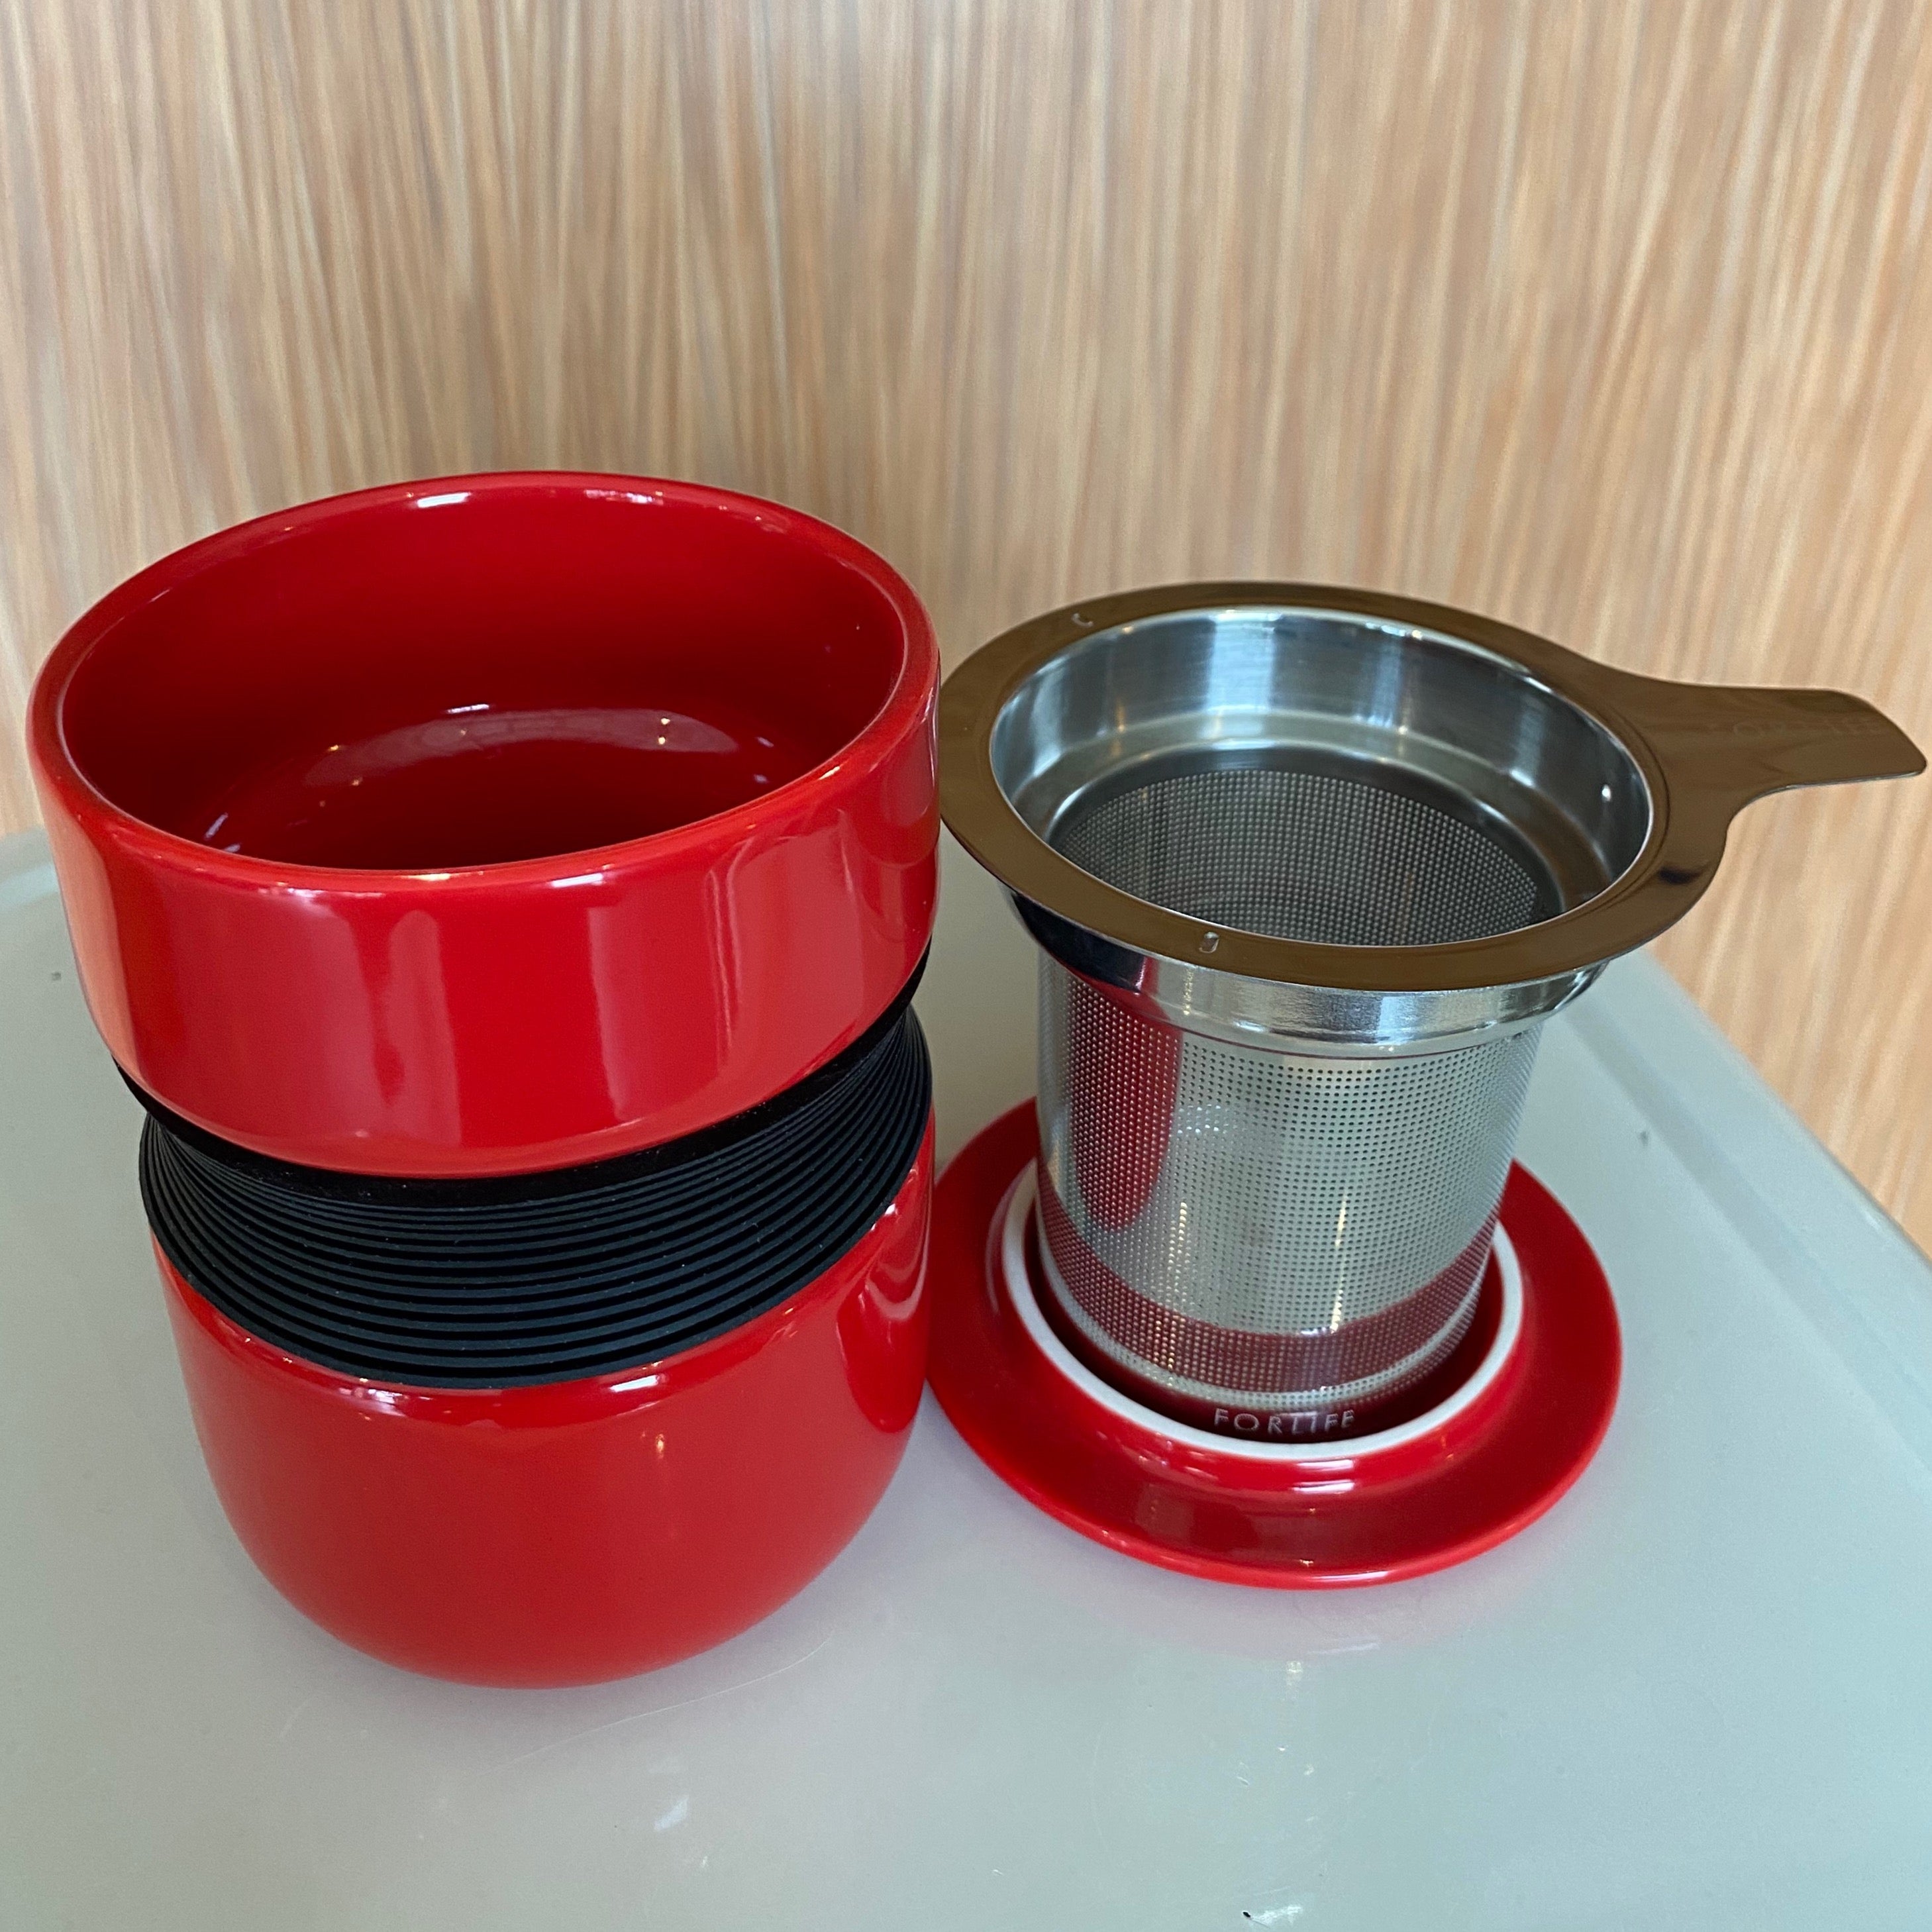 Red Asian style tea mug with infuser & lid, For Life brand